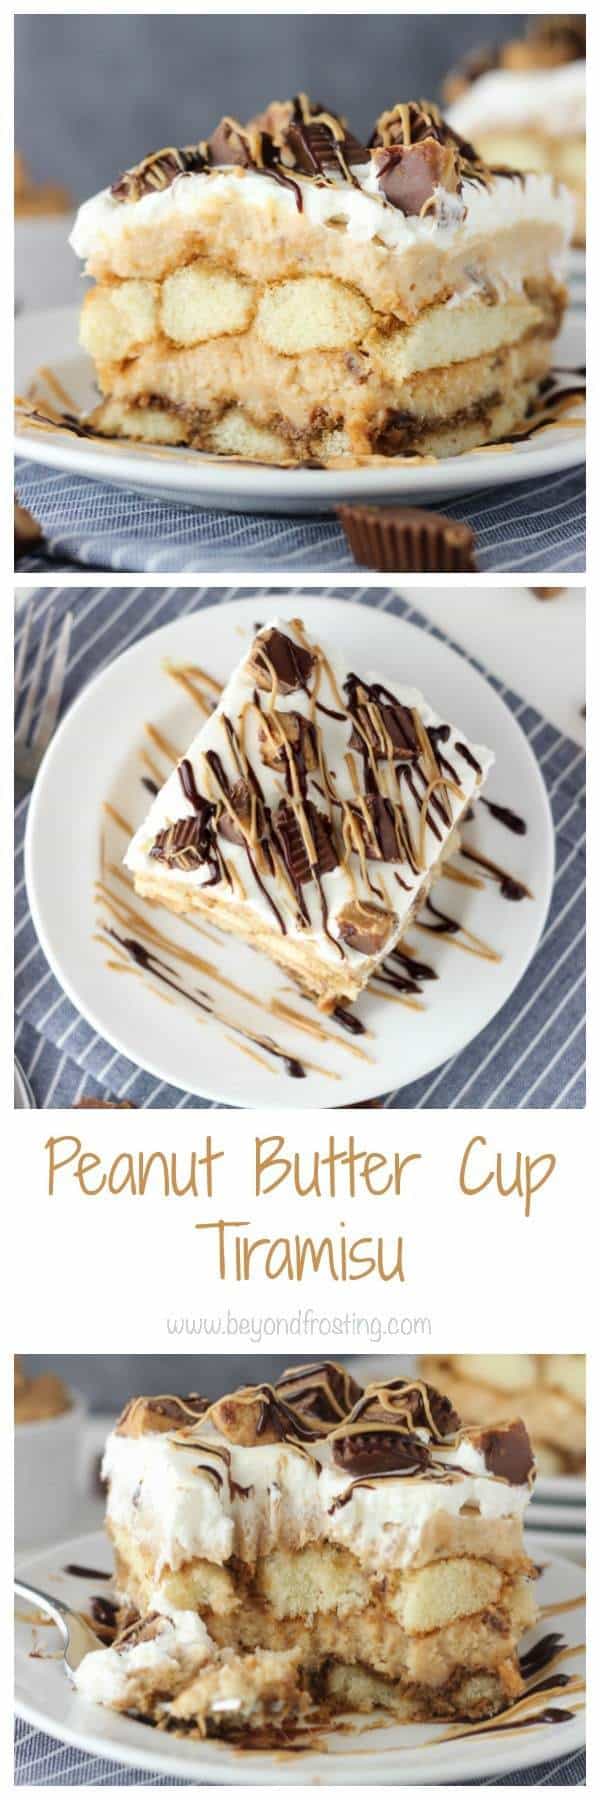 You'll need an extra big fork for this Peanut Butter Cup Tiramisu. This dessert is layers of  espresso-soaked ladyfingers, peanut butter mousse and whipped cream. It's also loaded with Reese's Peanut Butter Cups, that's just a bonus